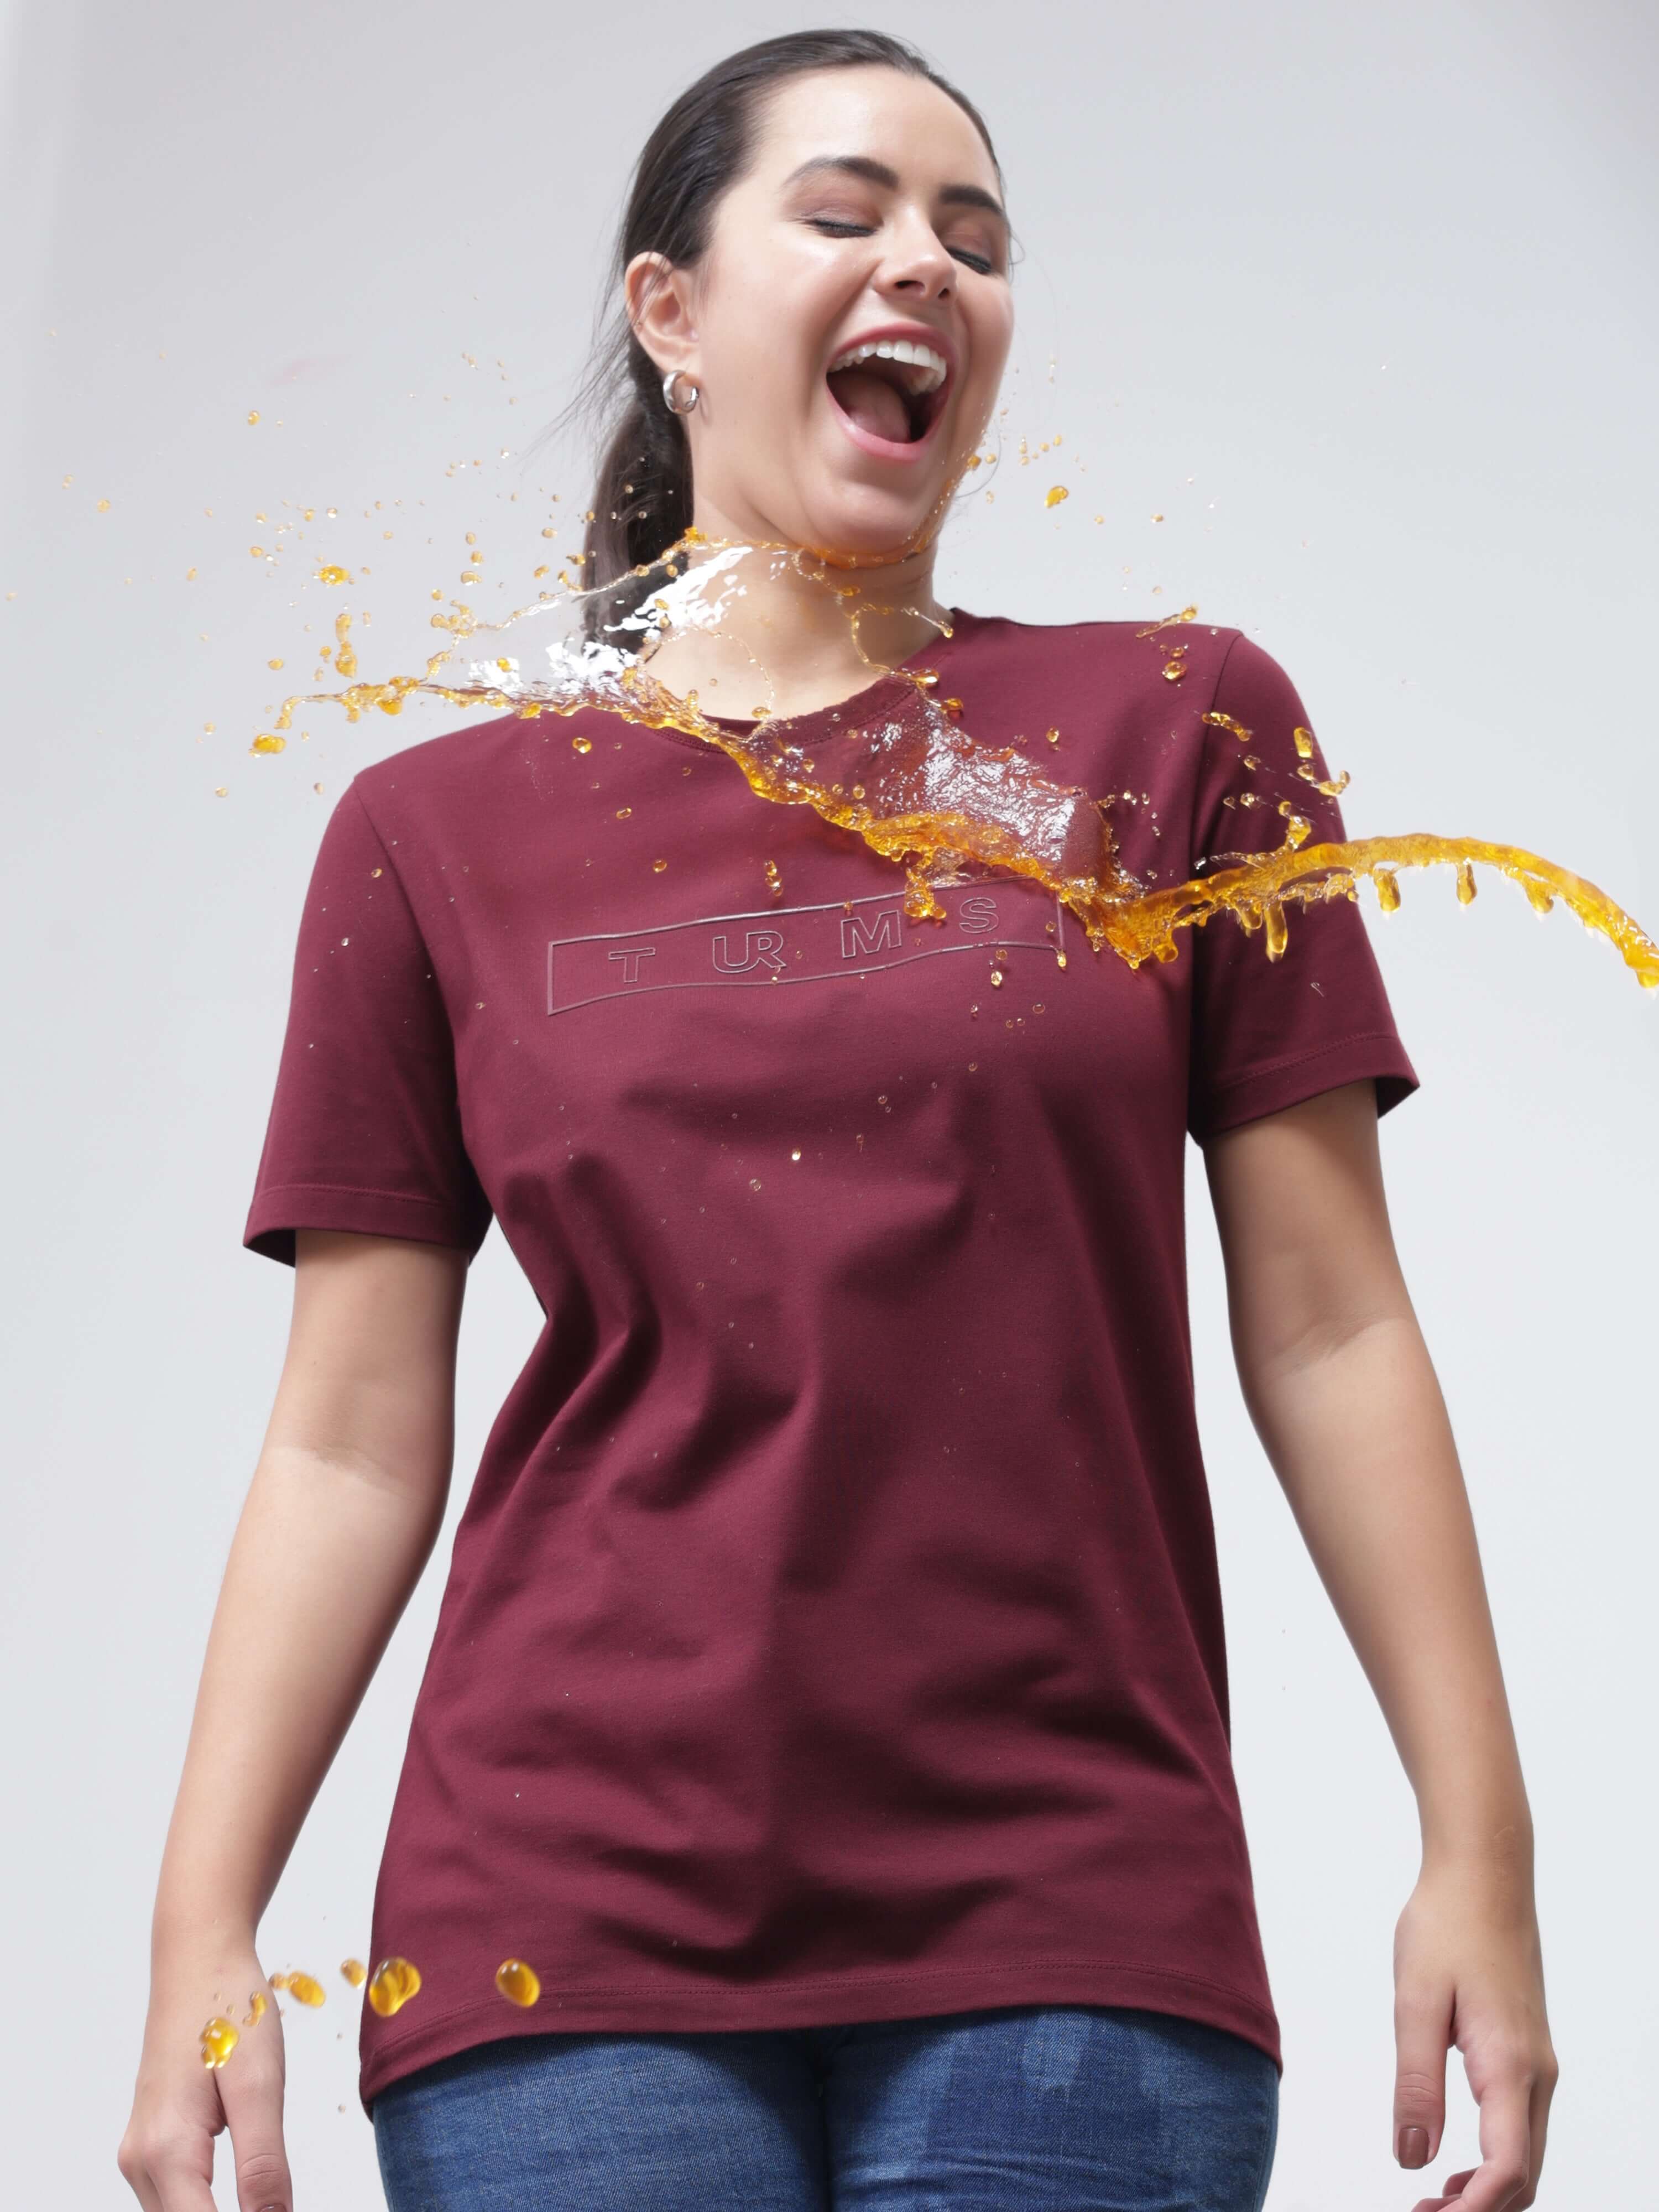 Woman wearing Burgundy Elite Turms T-shirt with spill deflecting off, showcasing anti-stain and anti-odour capabilities.